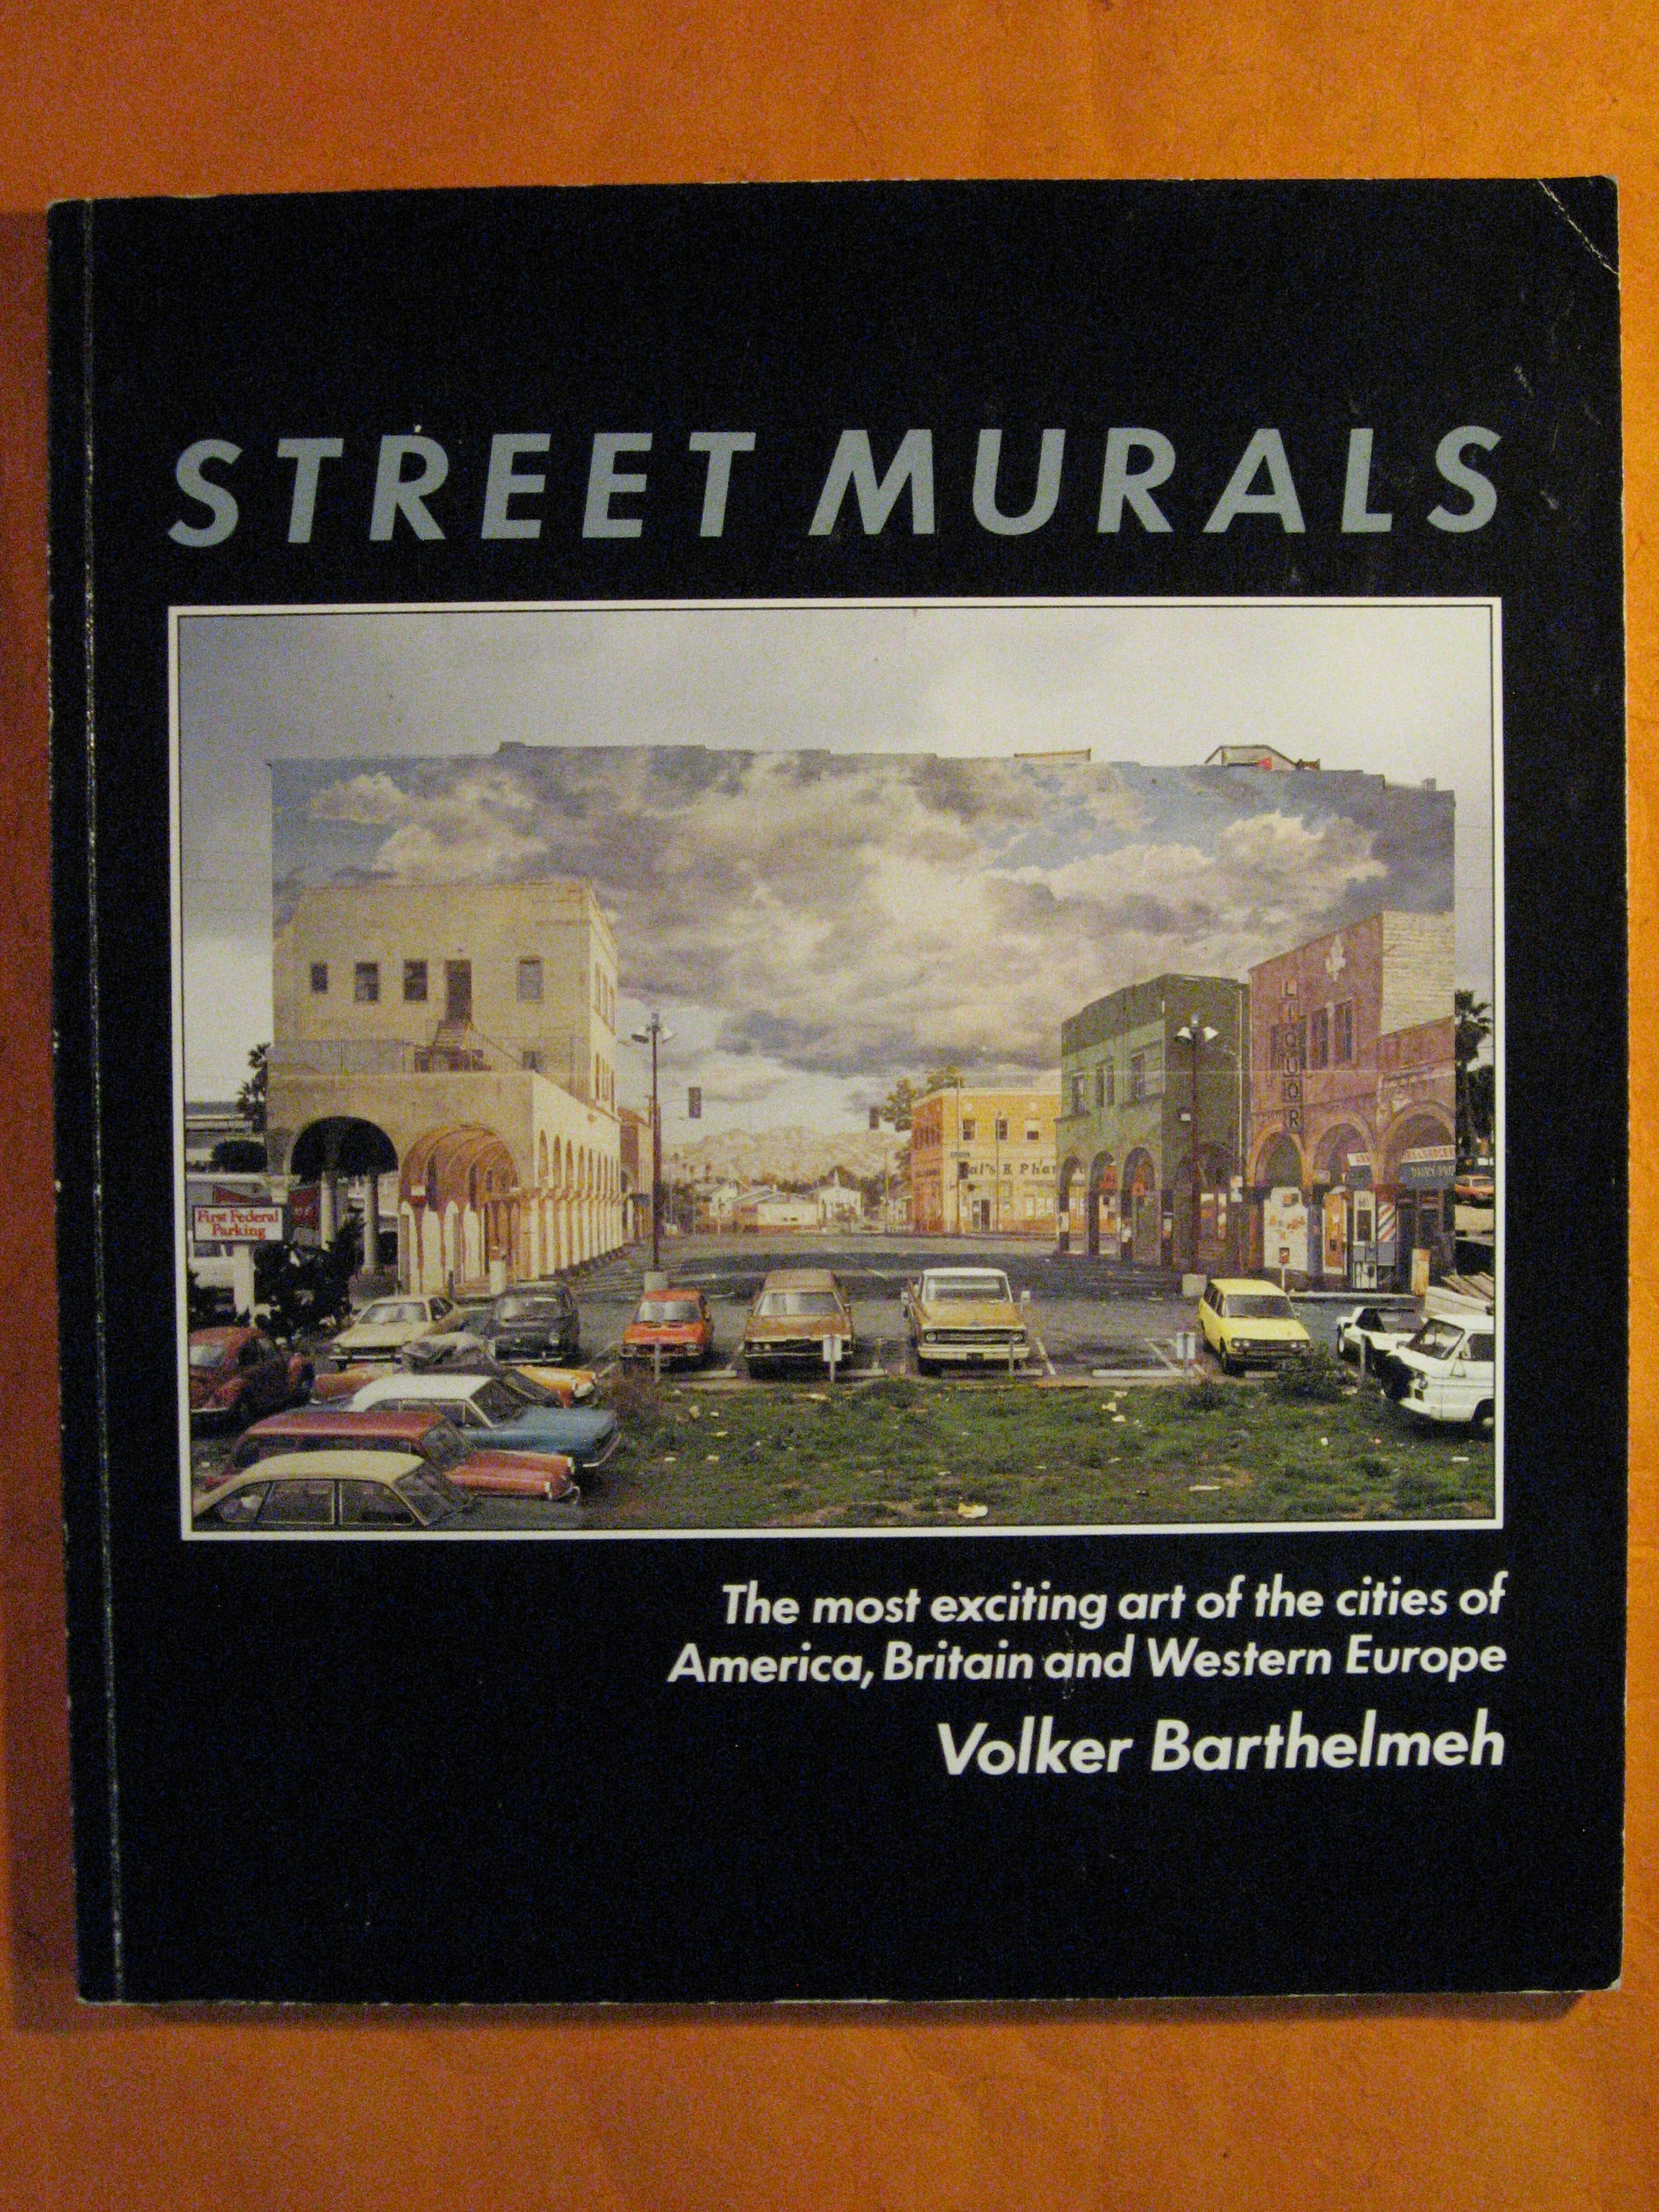 Street Murals: The Most Exciting Art of the Cities of America